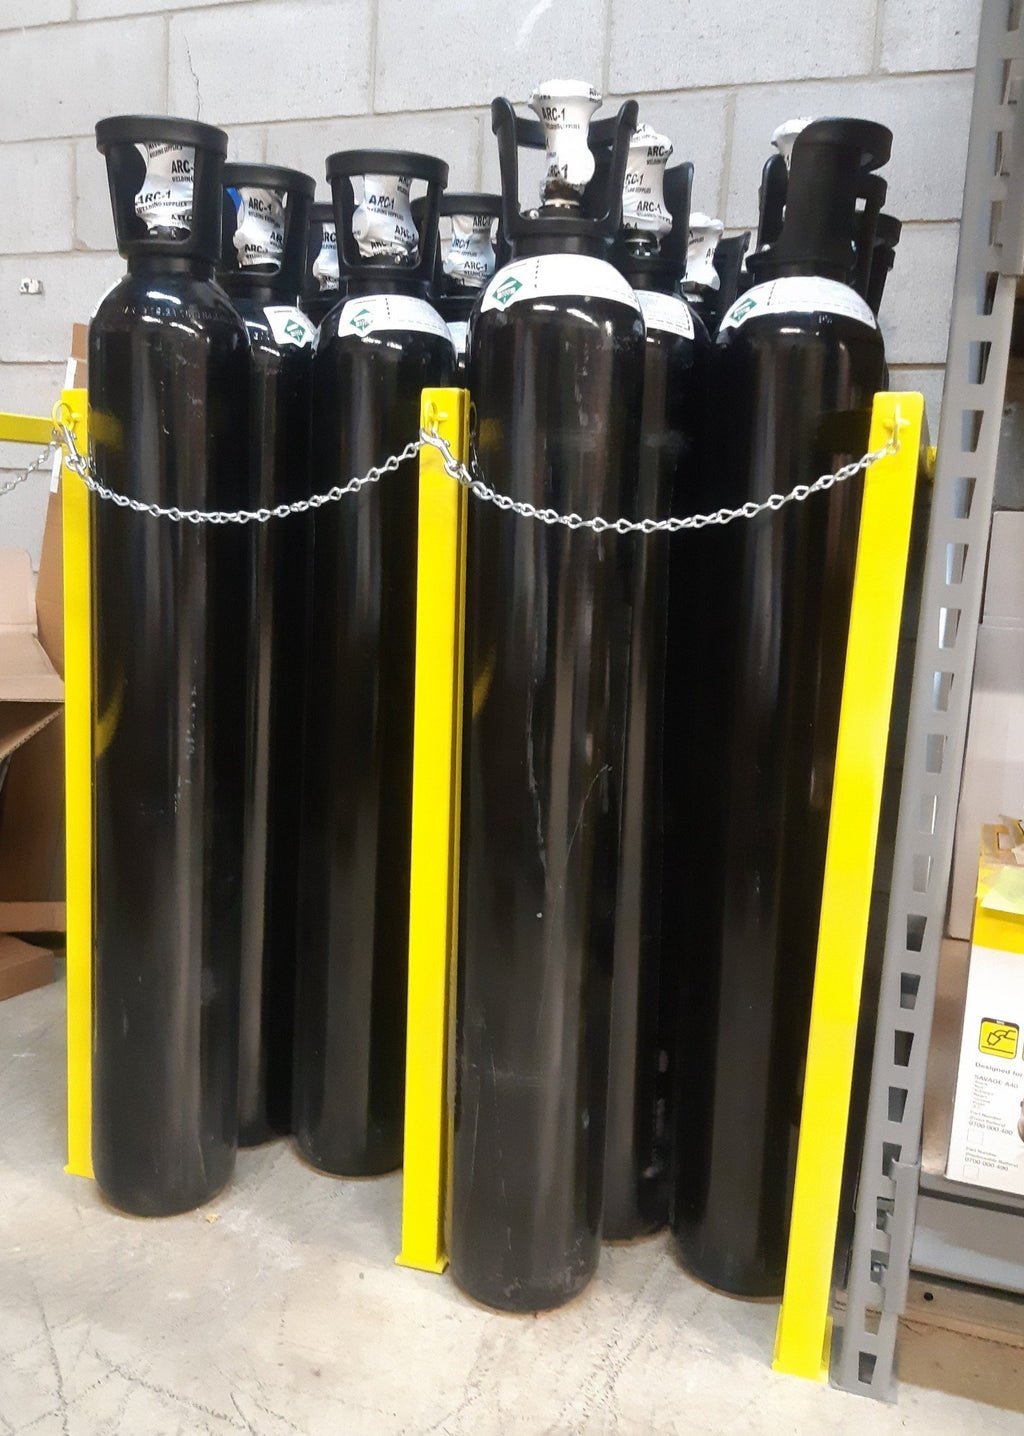 Argon Gas Canisters